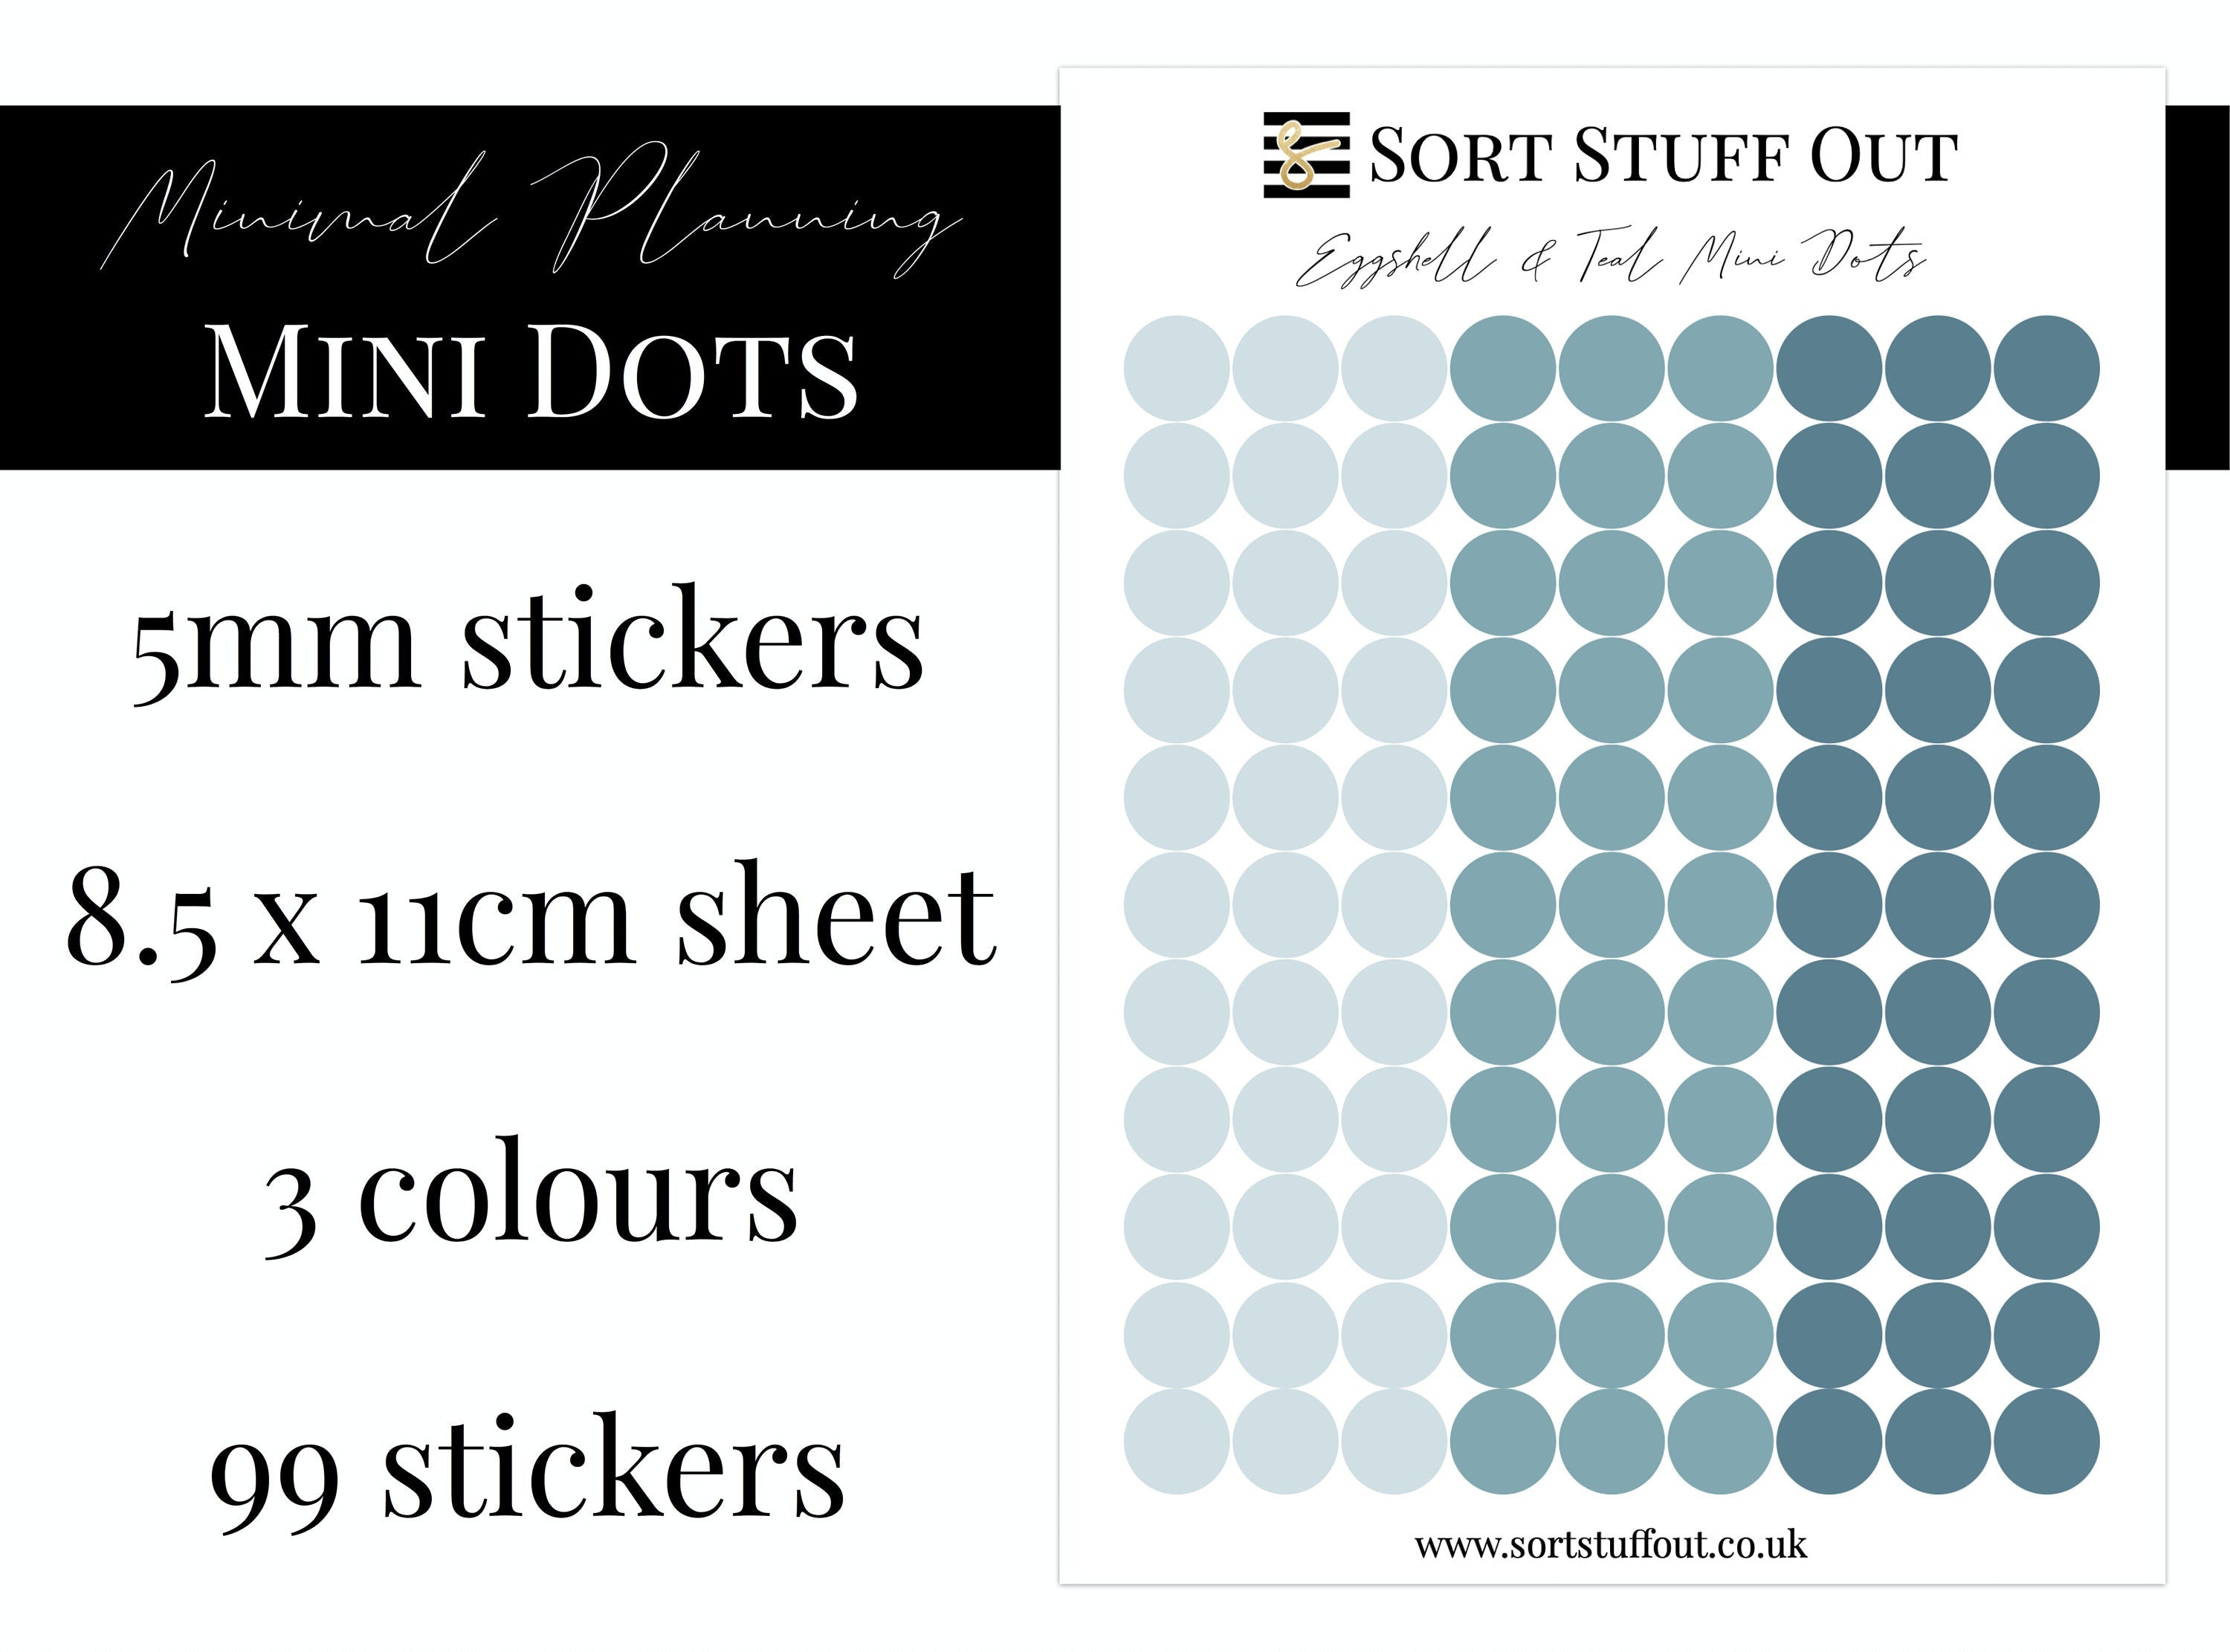 Eggshell and Teal Mini Dot Stickers